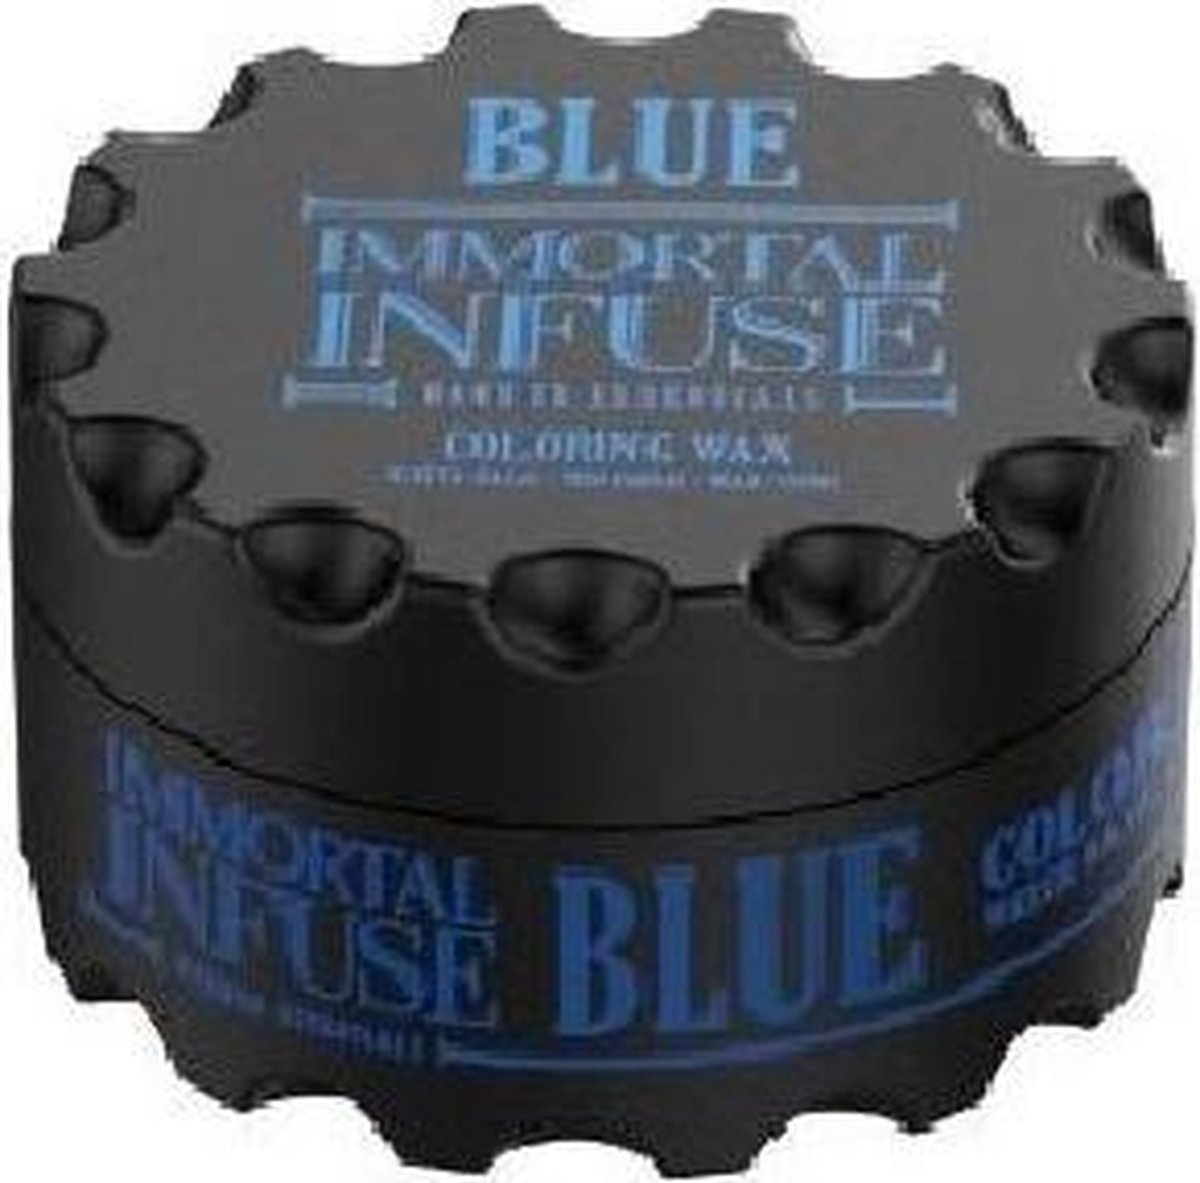 Immortal Infuse Coloring Wax Blue 100ml